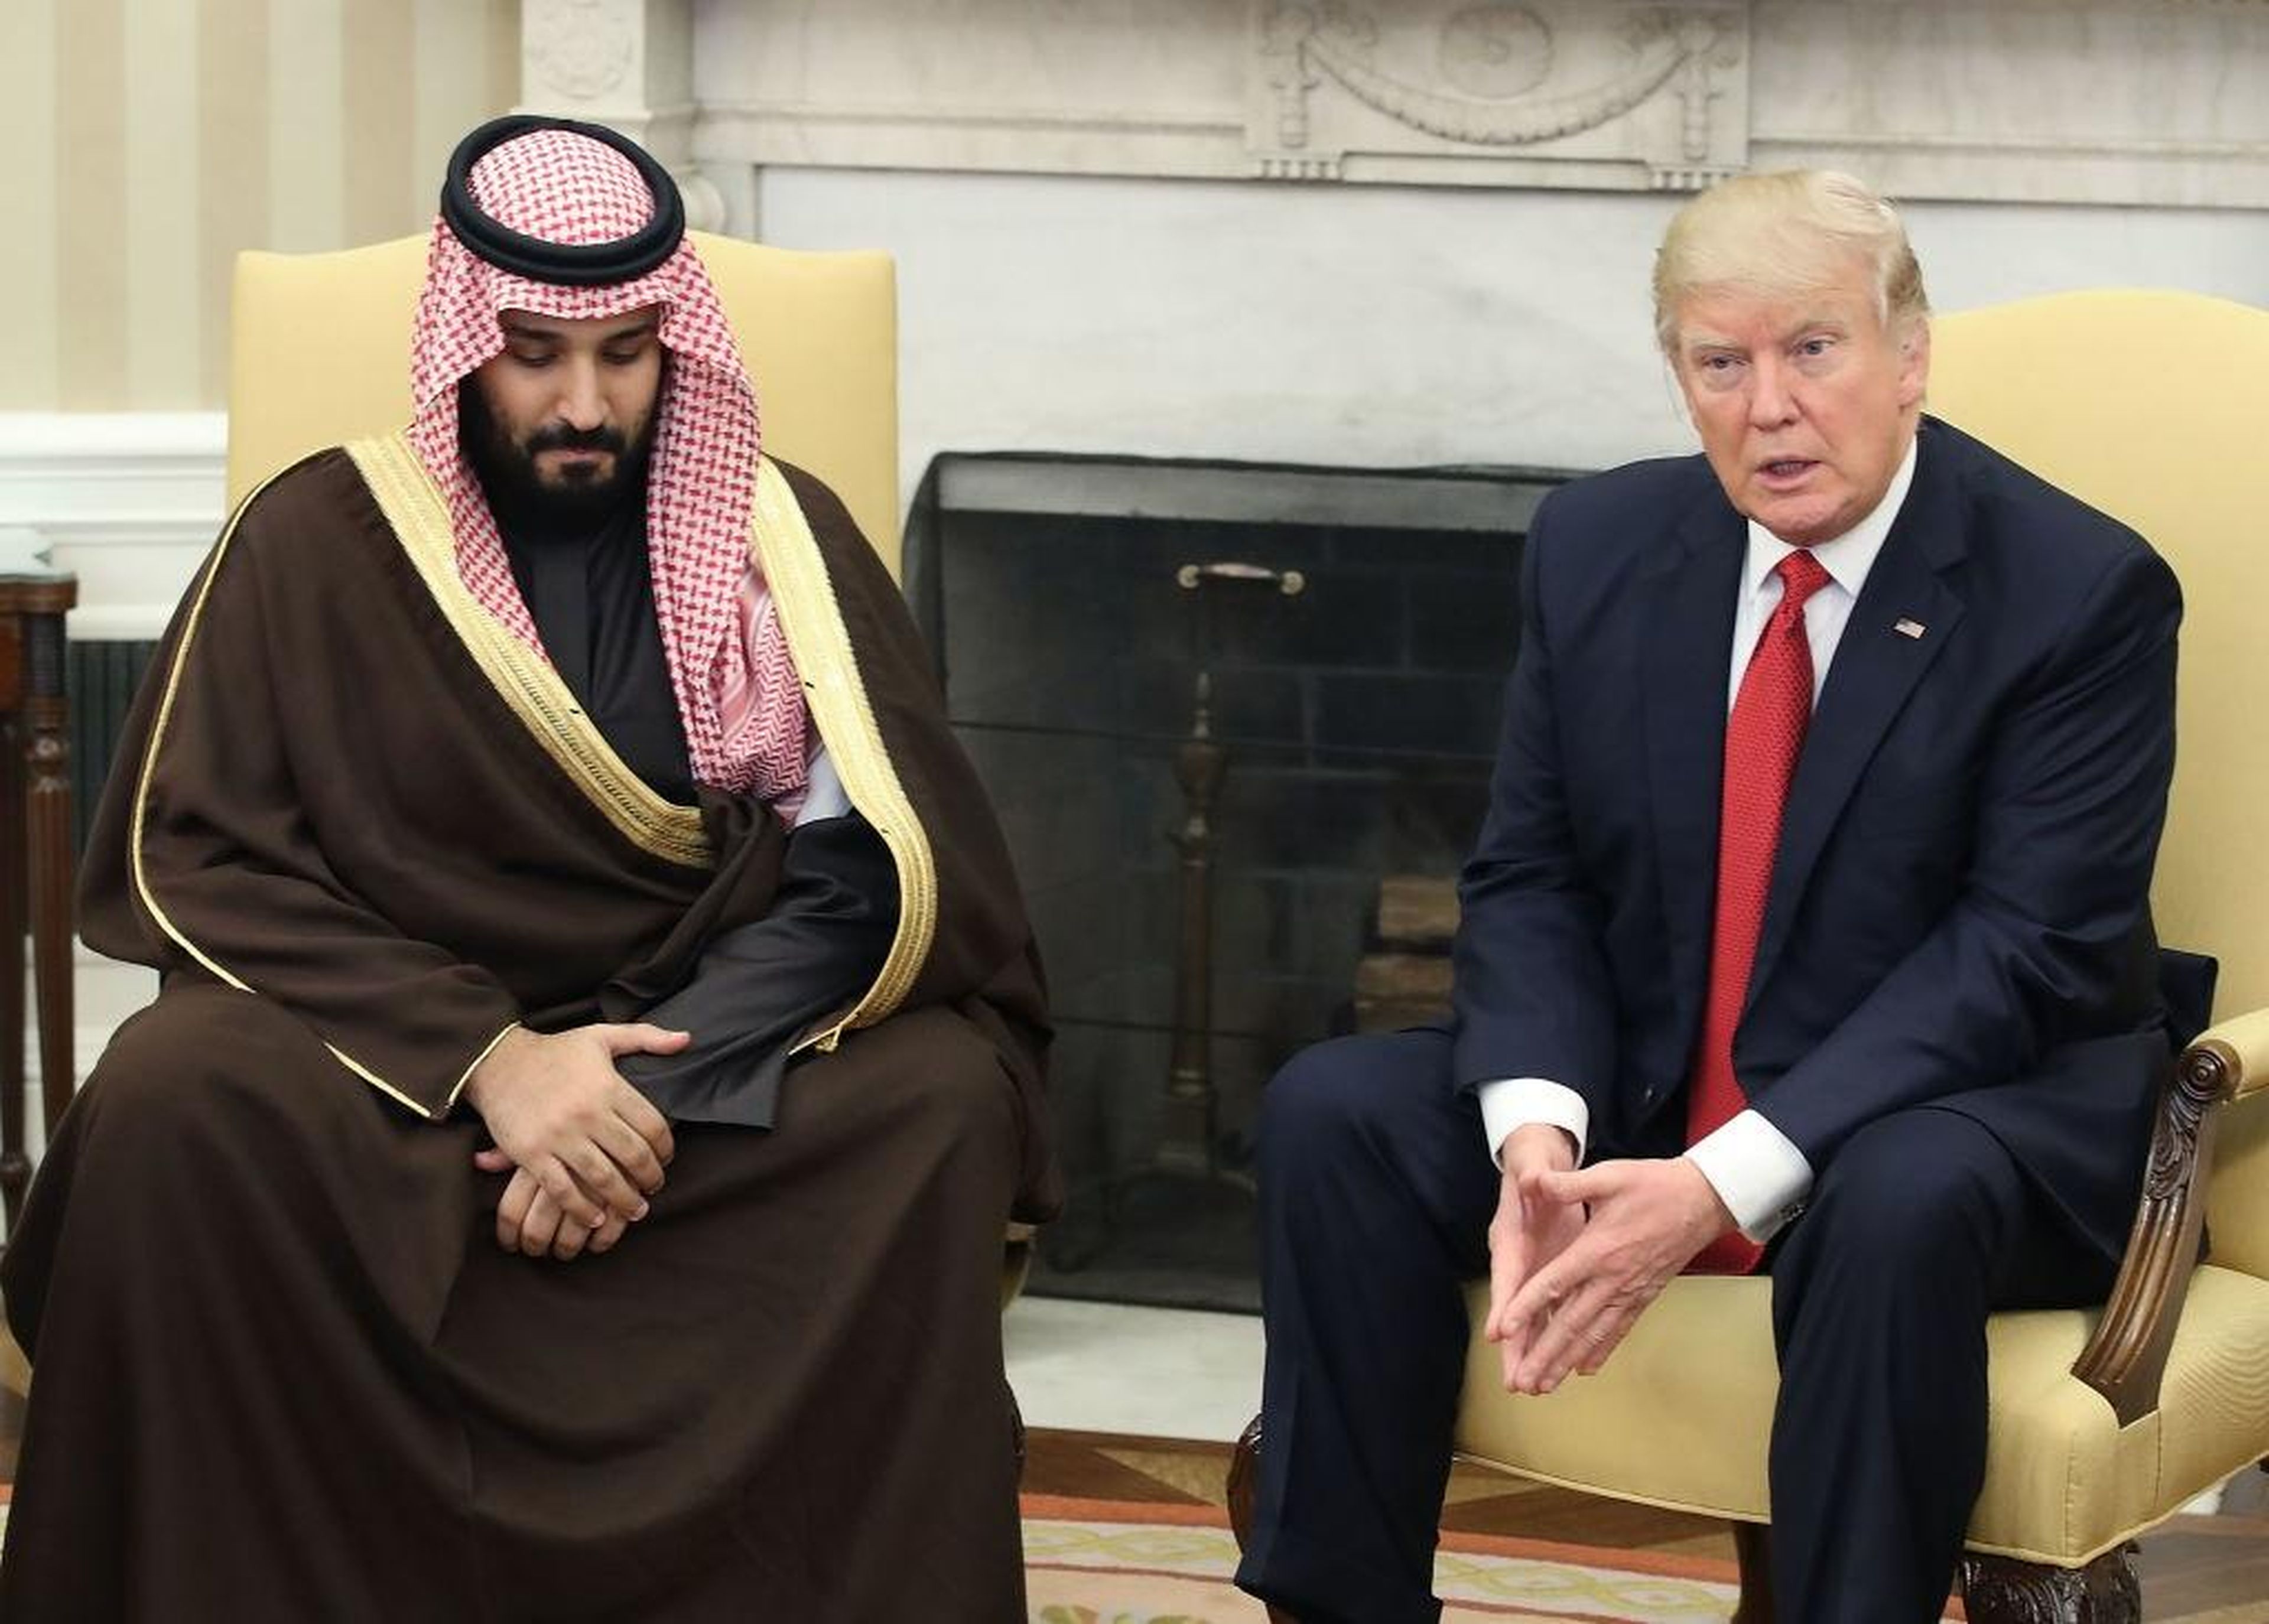 President Donald Trump and Mohammed bin Salman in the Oval Office at the White House in March 2017.